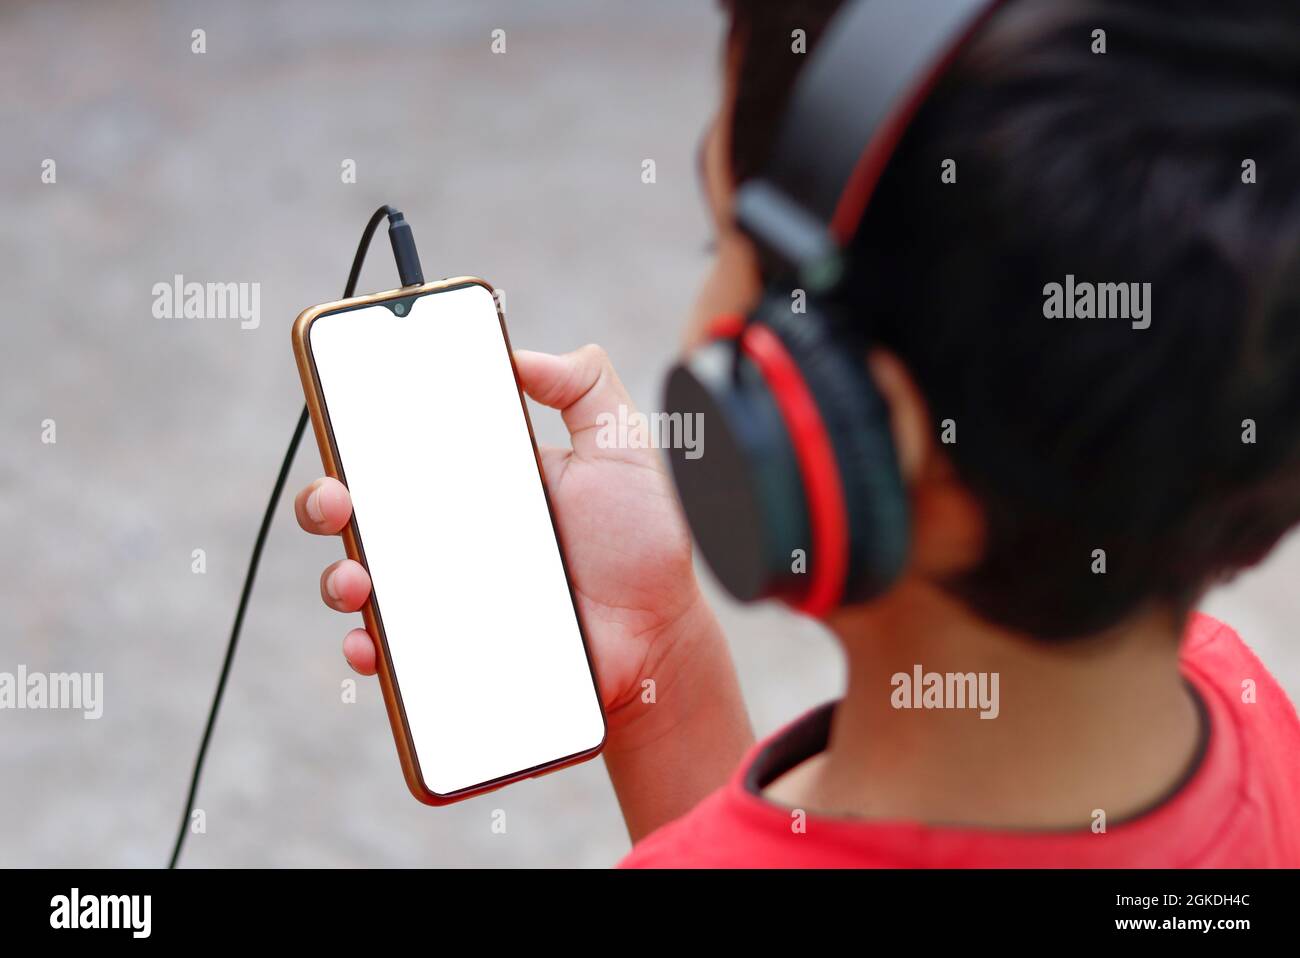 Child wearing headphones showing and using blank phone screen outdoors. Stock Photo